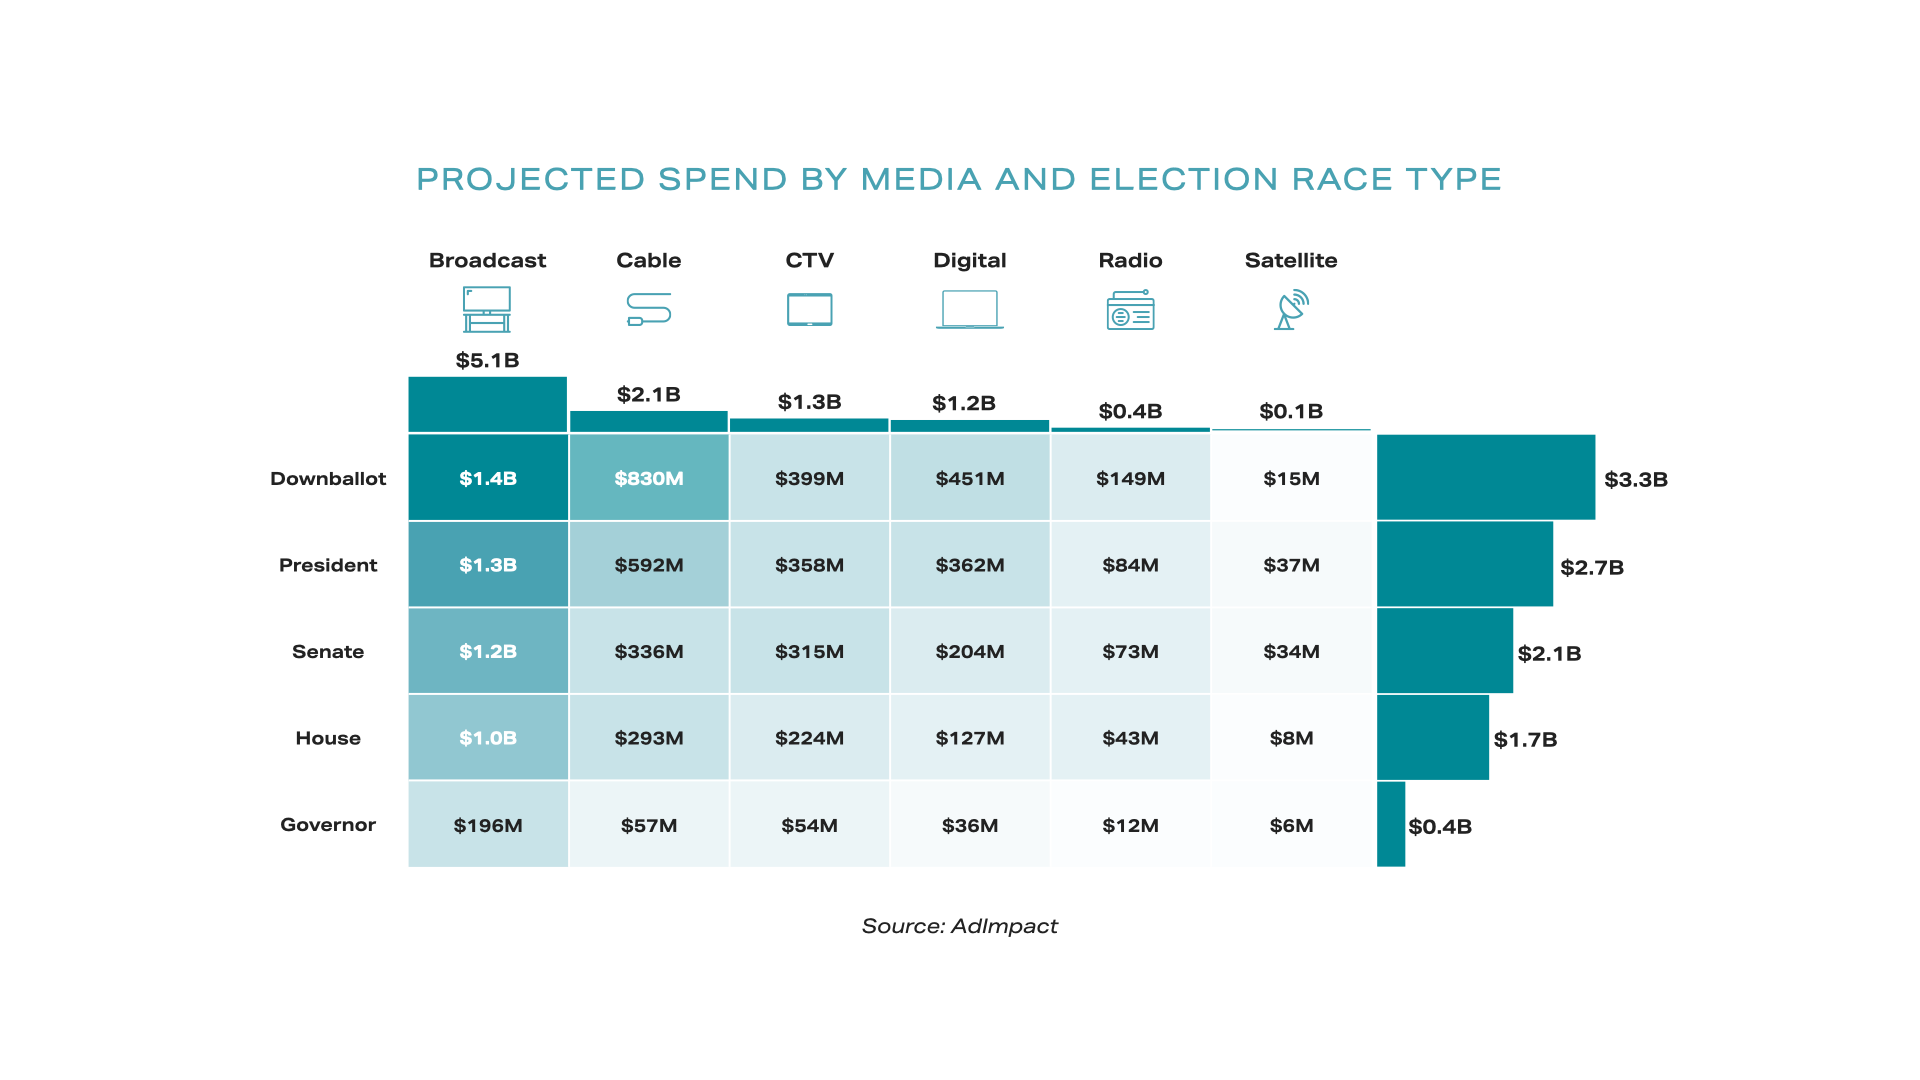 Elections-POV-Projected Spend by Media and Election Race Type